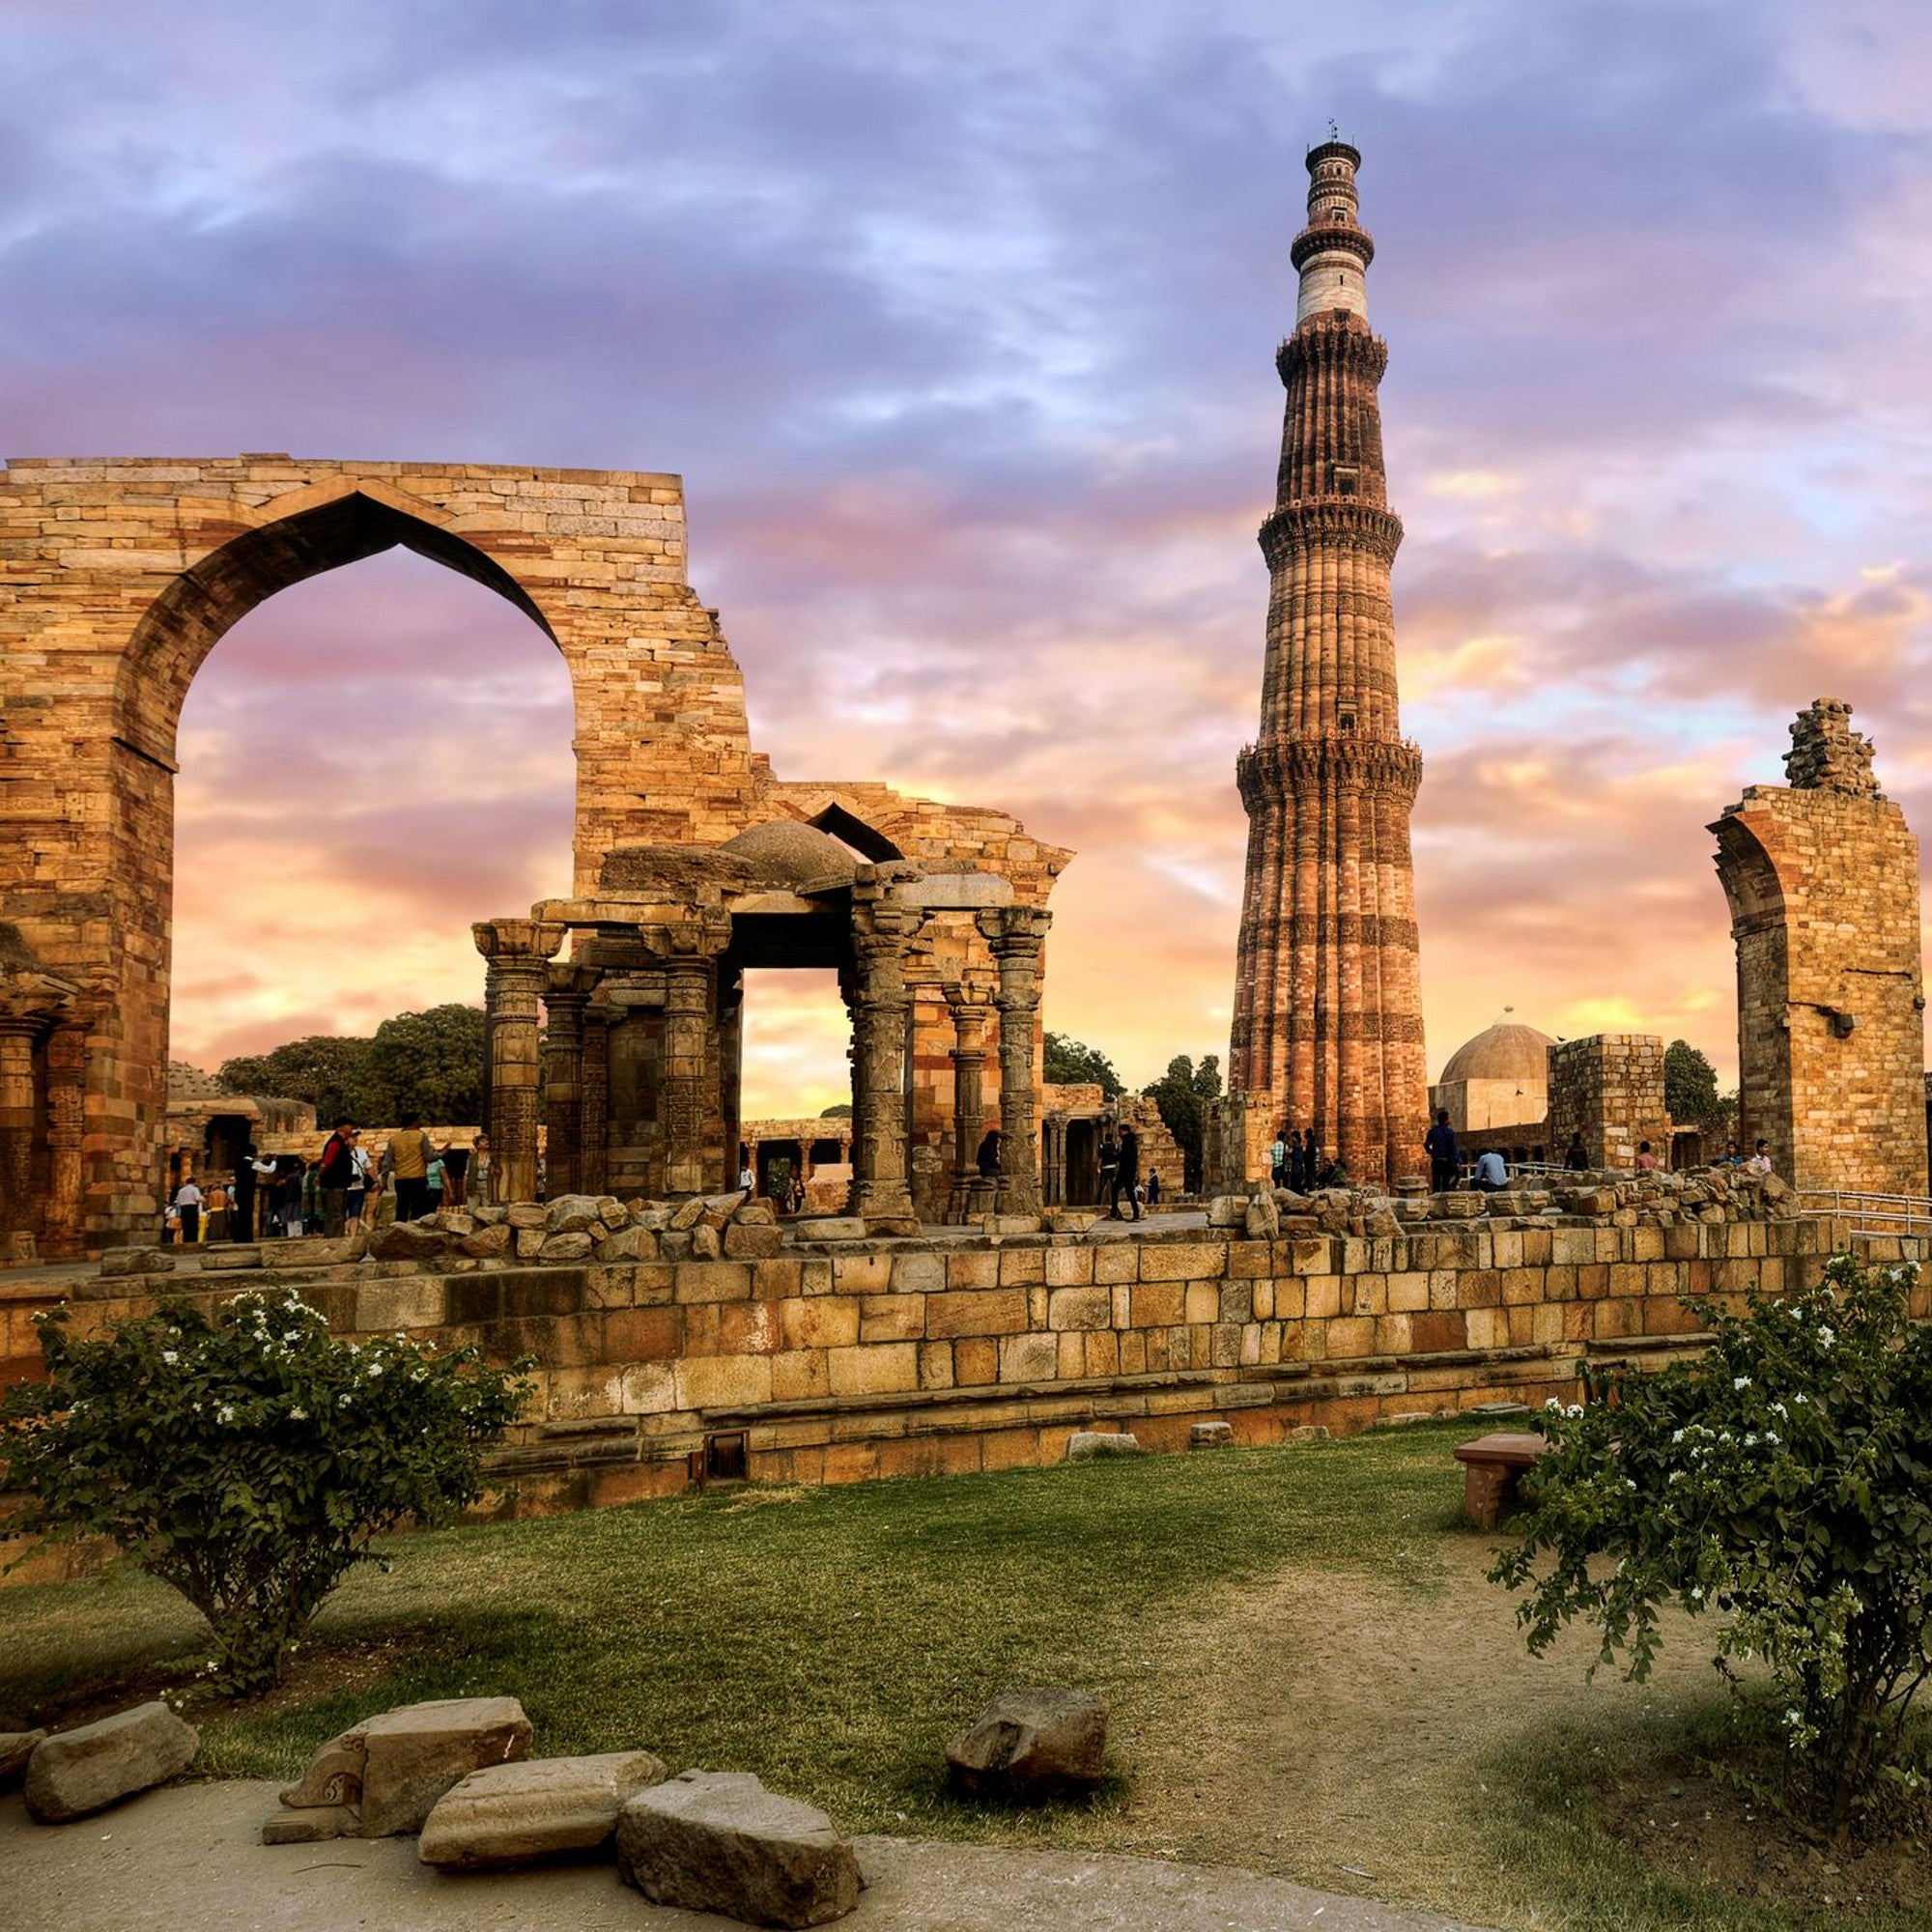 The stunning Qutub Minar, an ancient UNESCO World Heritage Site in Delhi, India, rising tall against the sky.Signature India with Sandhya Balakrishnan - Yoga & Exploration - Journey - Zhoola